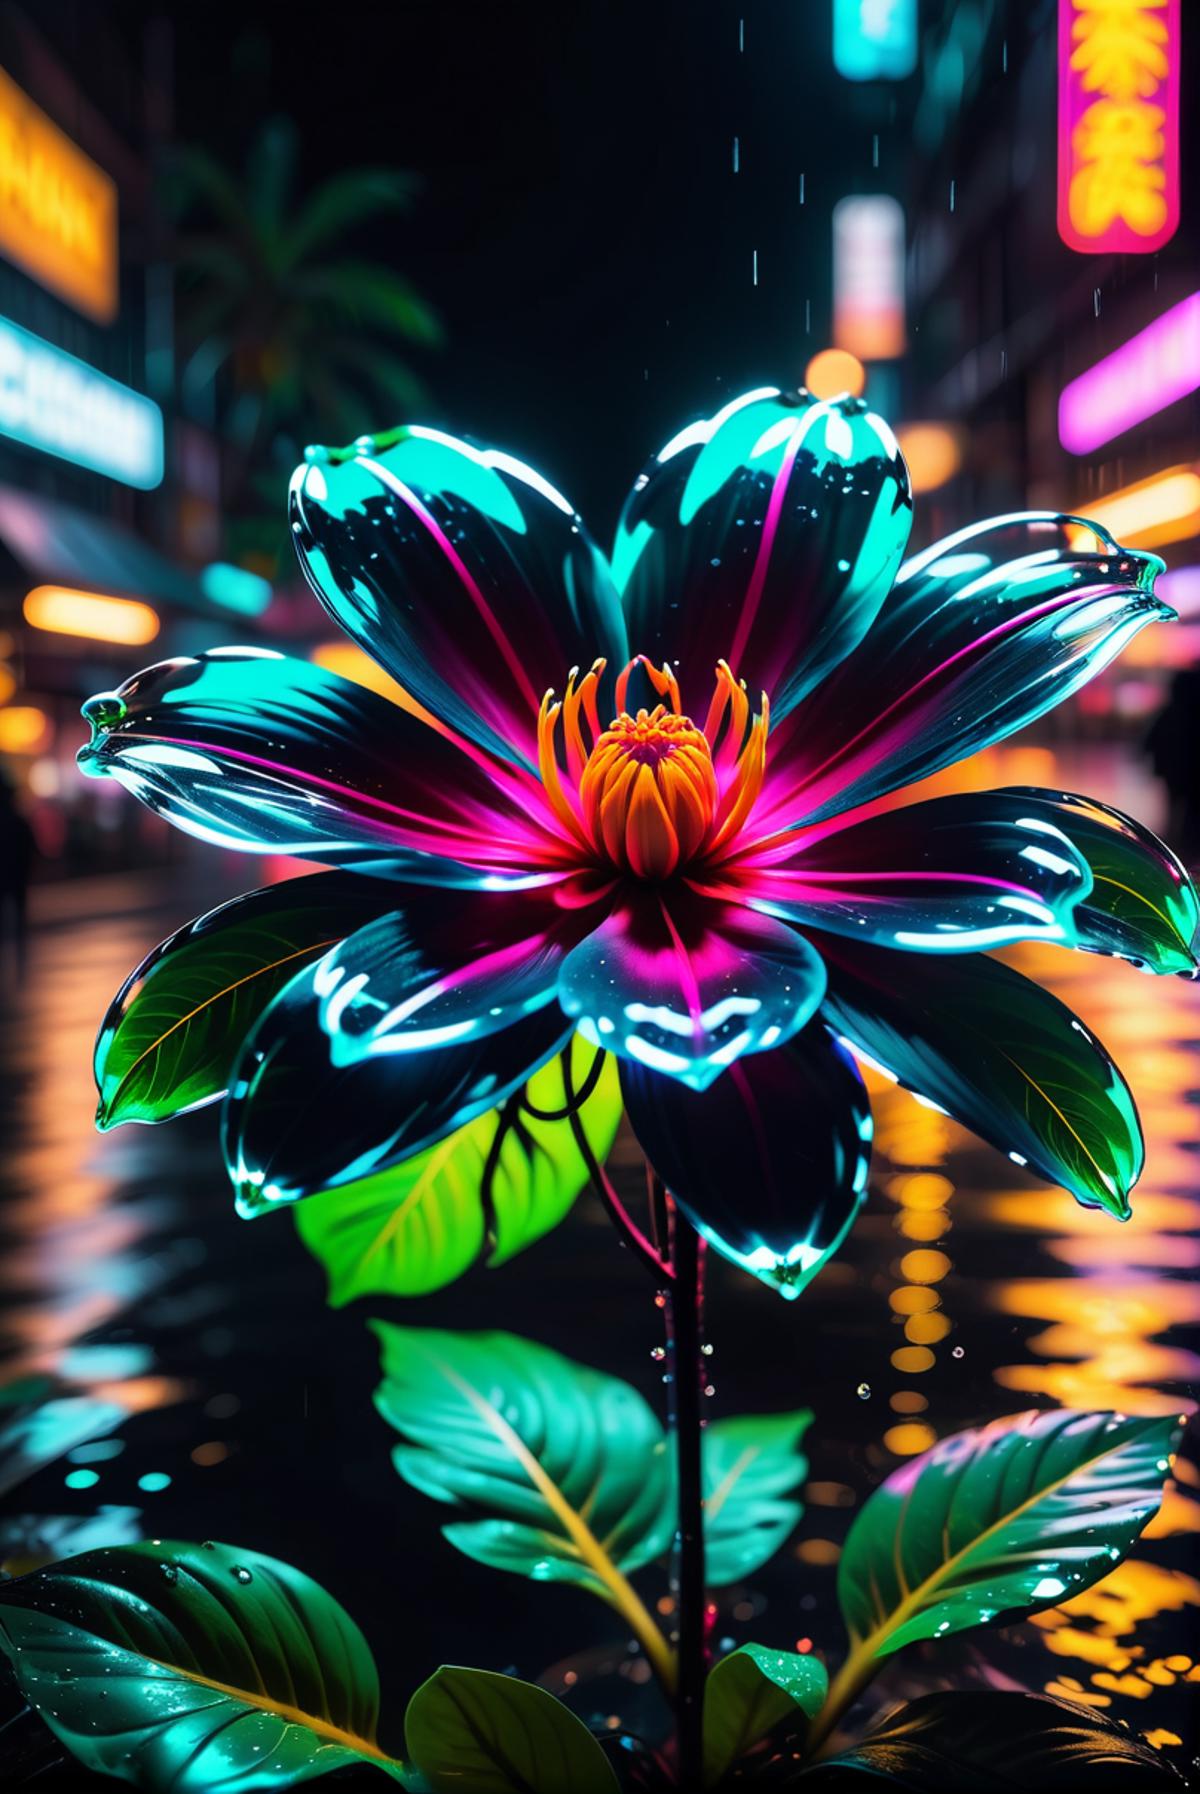 A colorful neon flower with yellow petals and purple center.